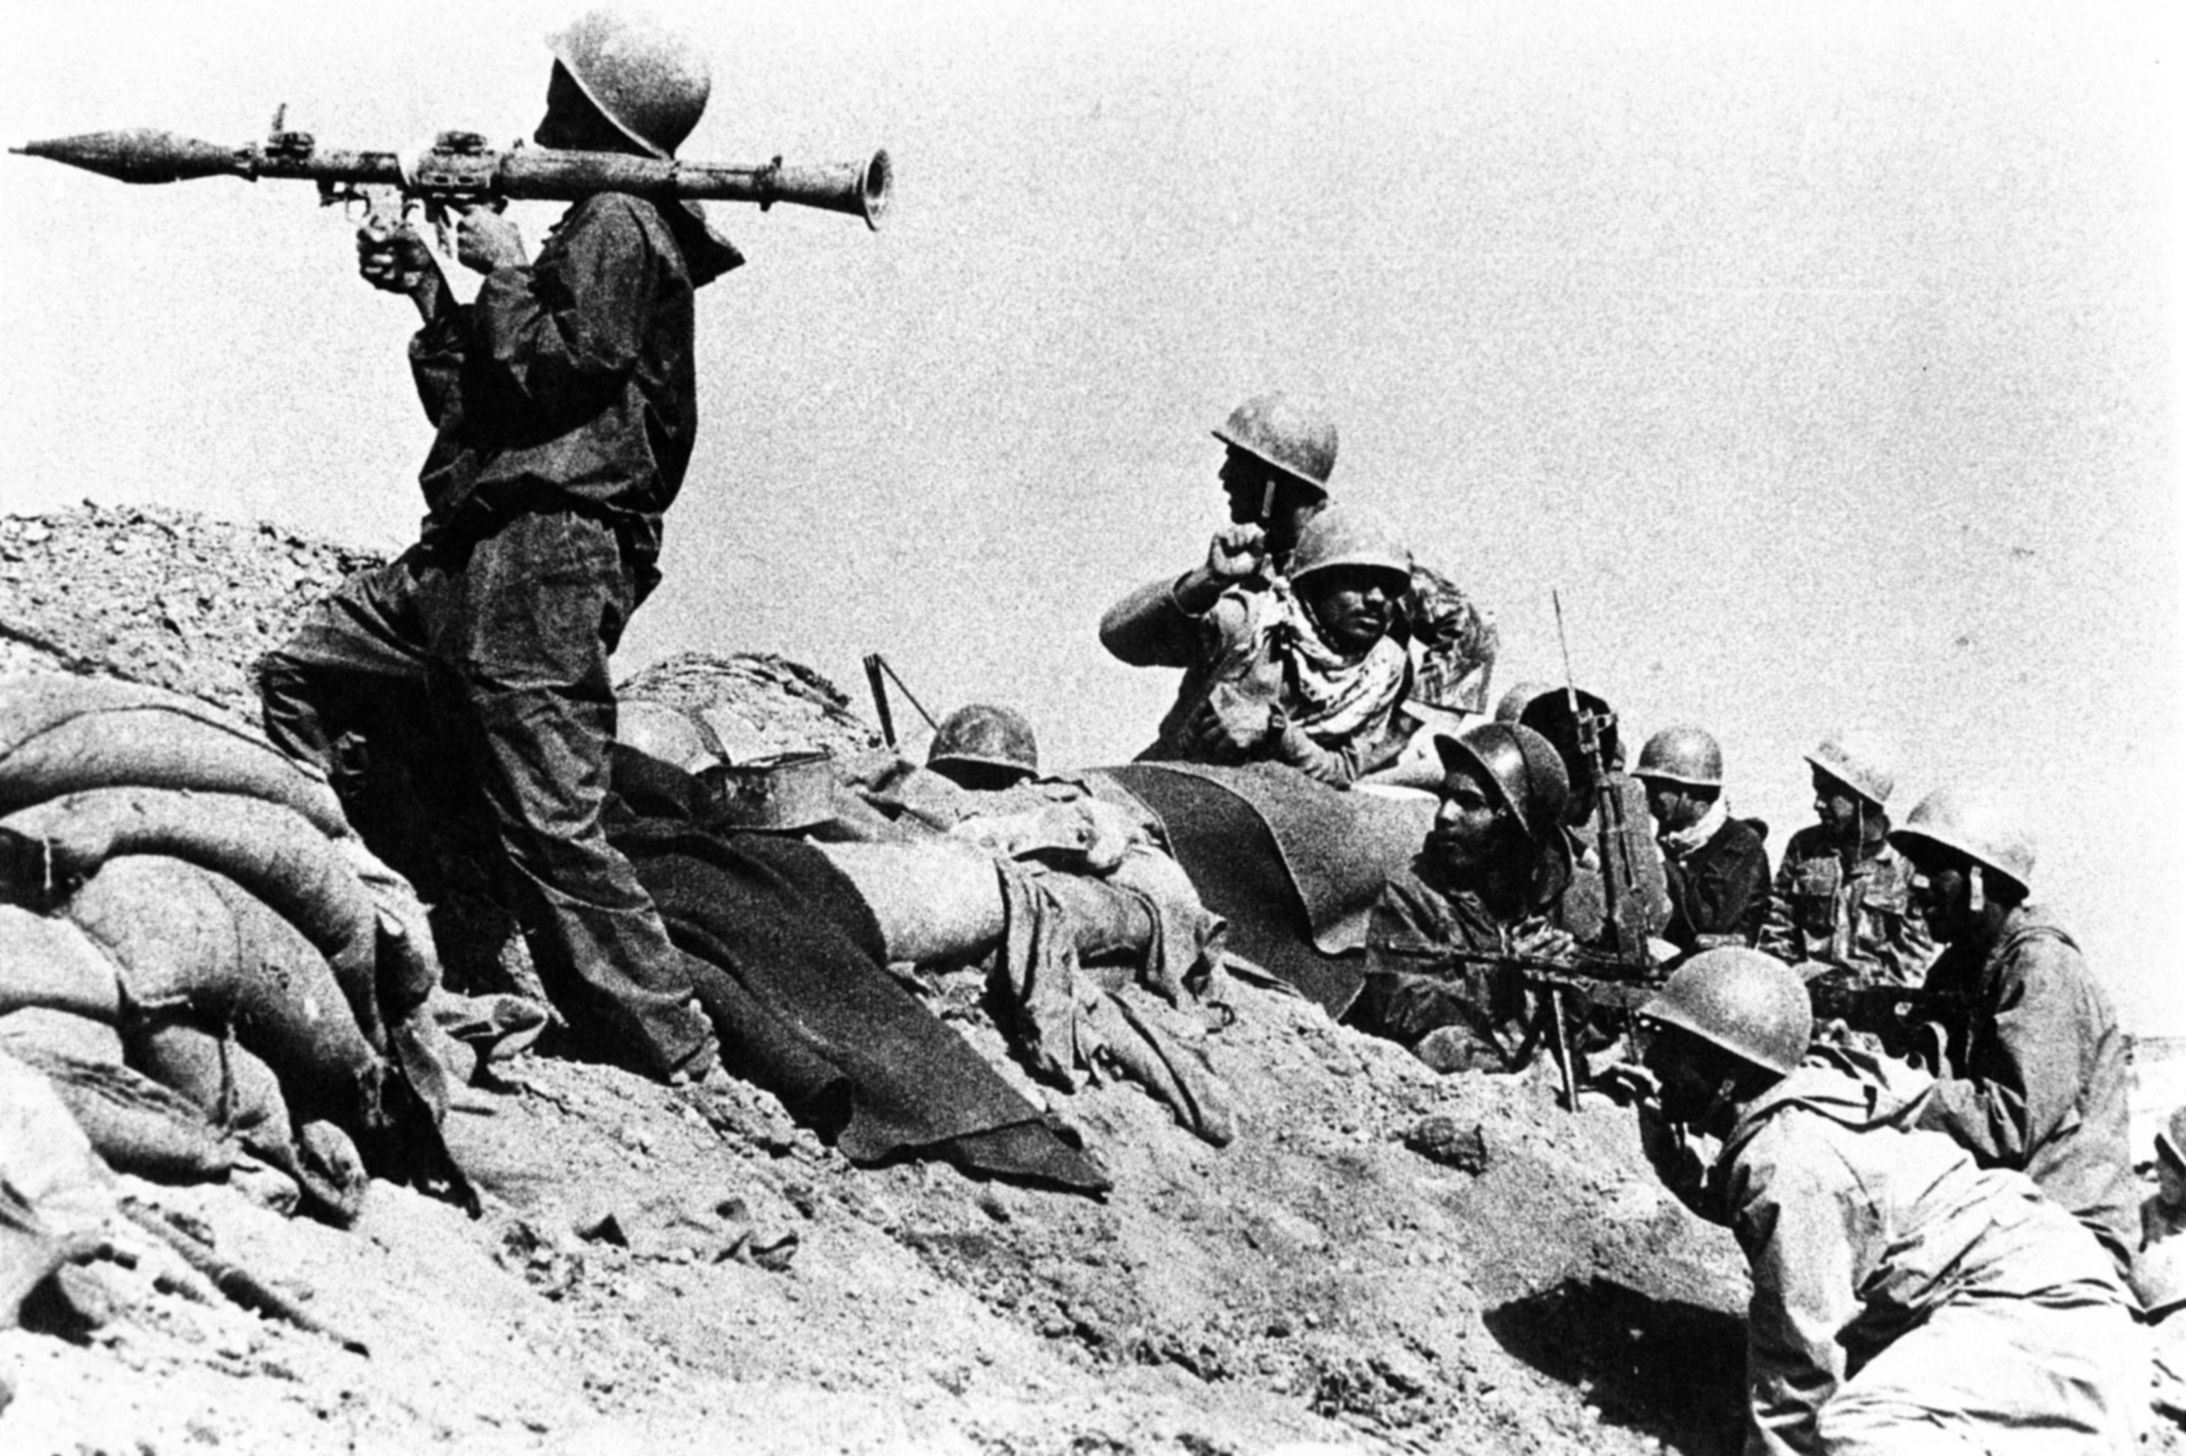 Iranian strategy was based on heavy land offensives in which lack of materiel was balanced by sheer masses of men. The slaughter was predictable.